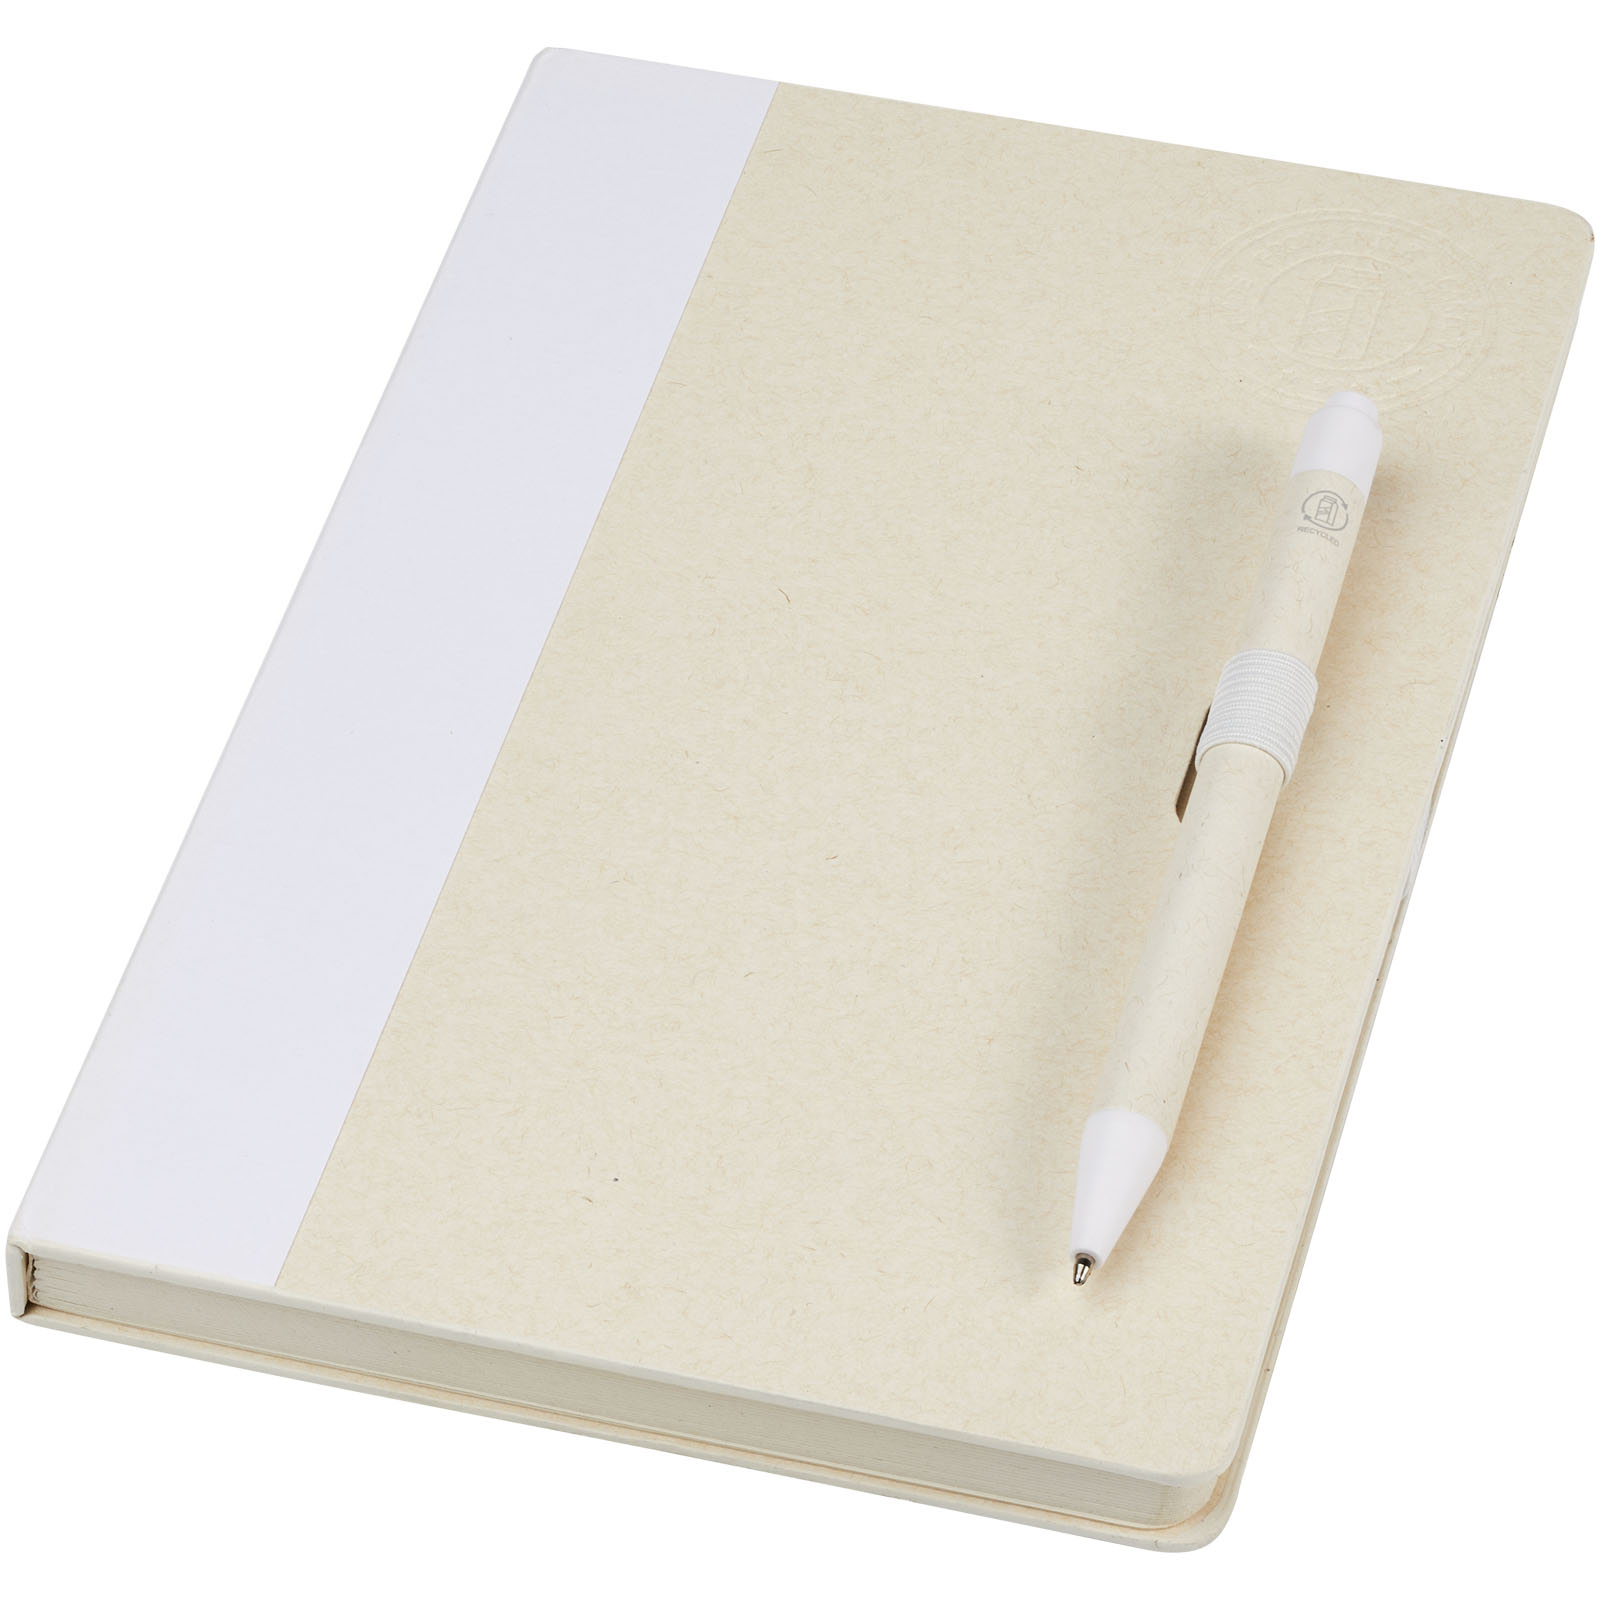 Hard cover notebooks - Dairy Dream A5 size reference recycled milk cartons notebook and ballpoint pen set